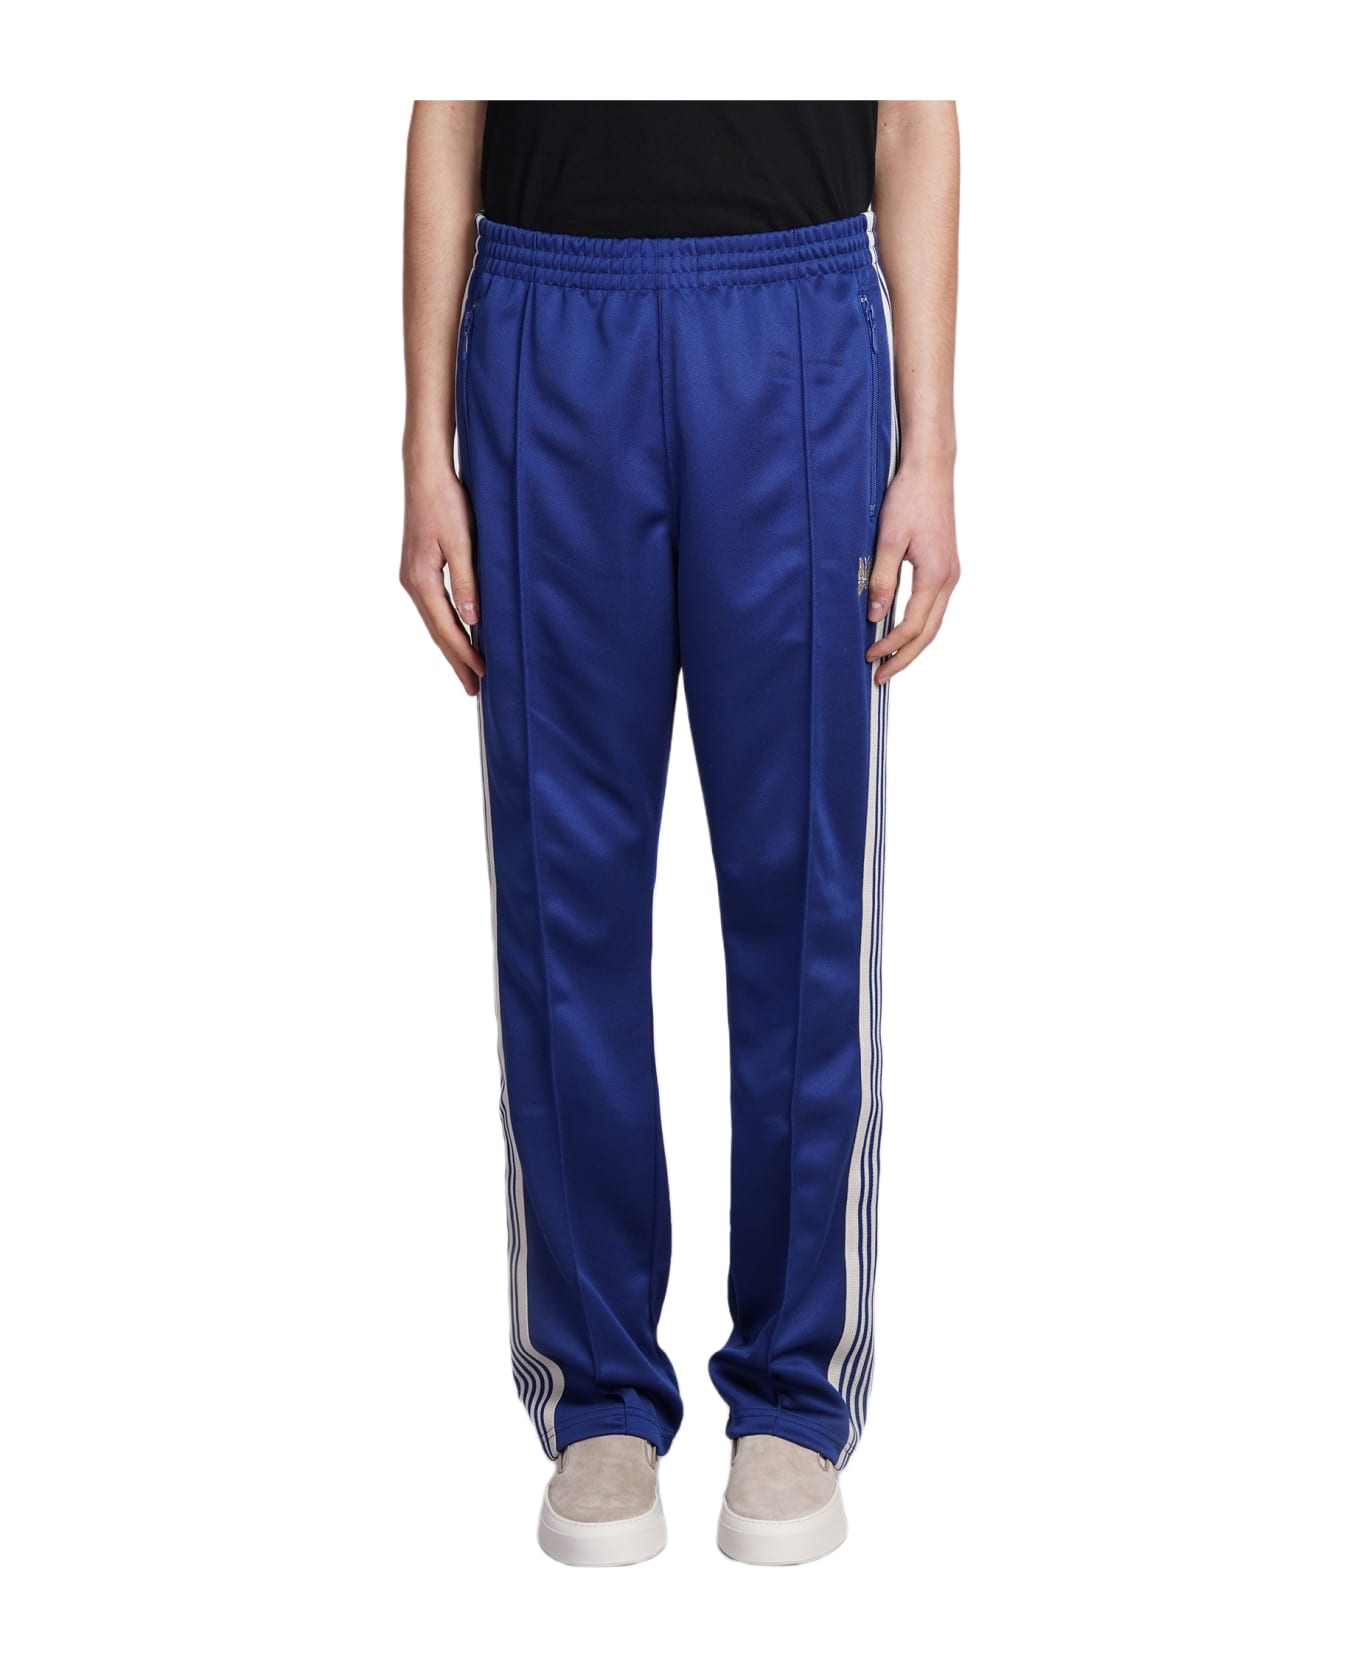 Needles Pants In Blue Polyester - blue ボトムス